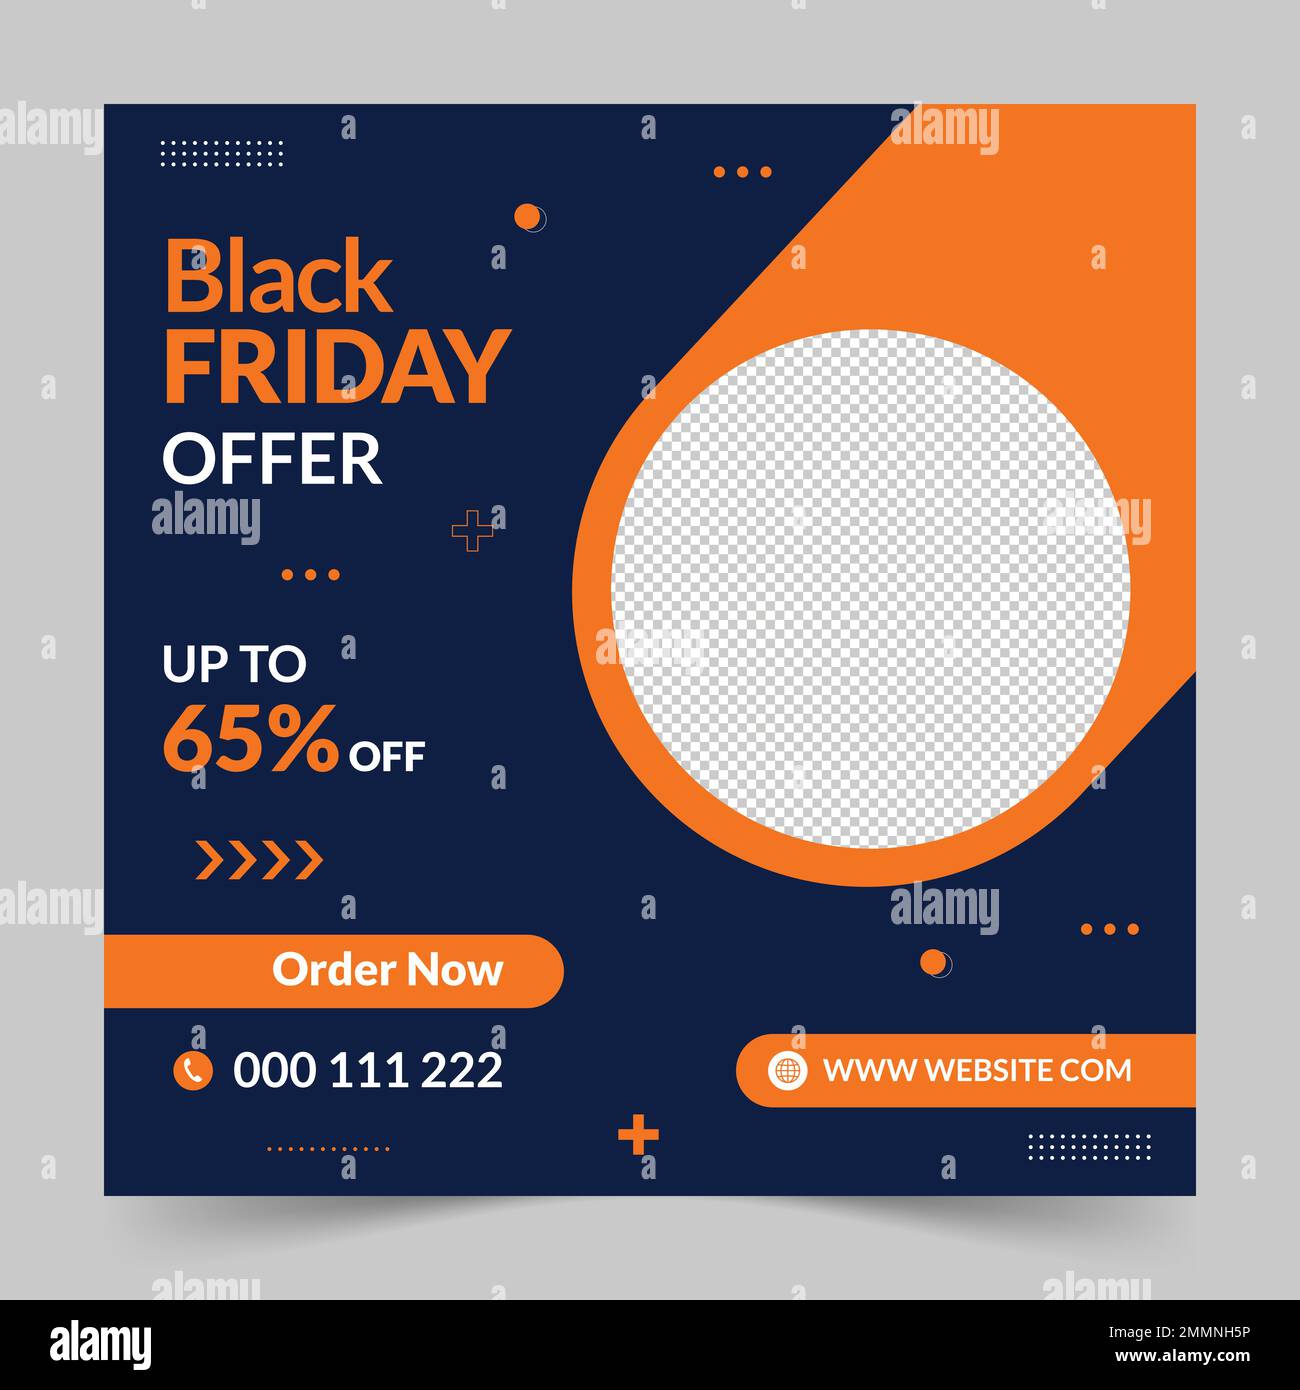 Black friday season sale social media post and web banner template for digital marketing. Trendy editable template for product promotion Stock Vector